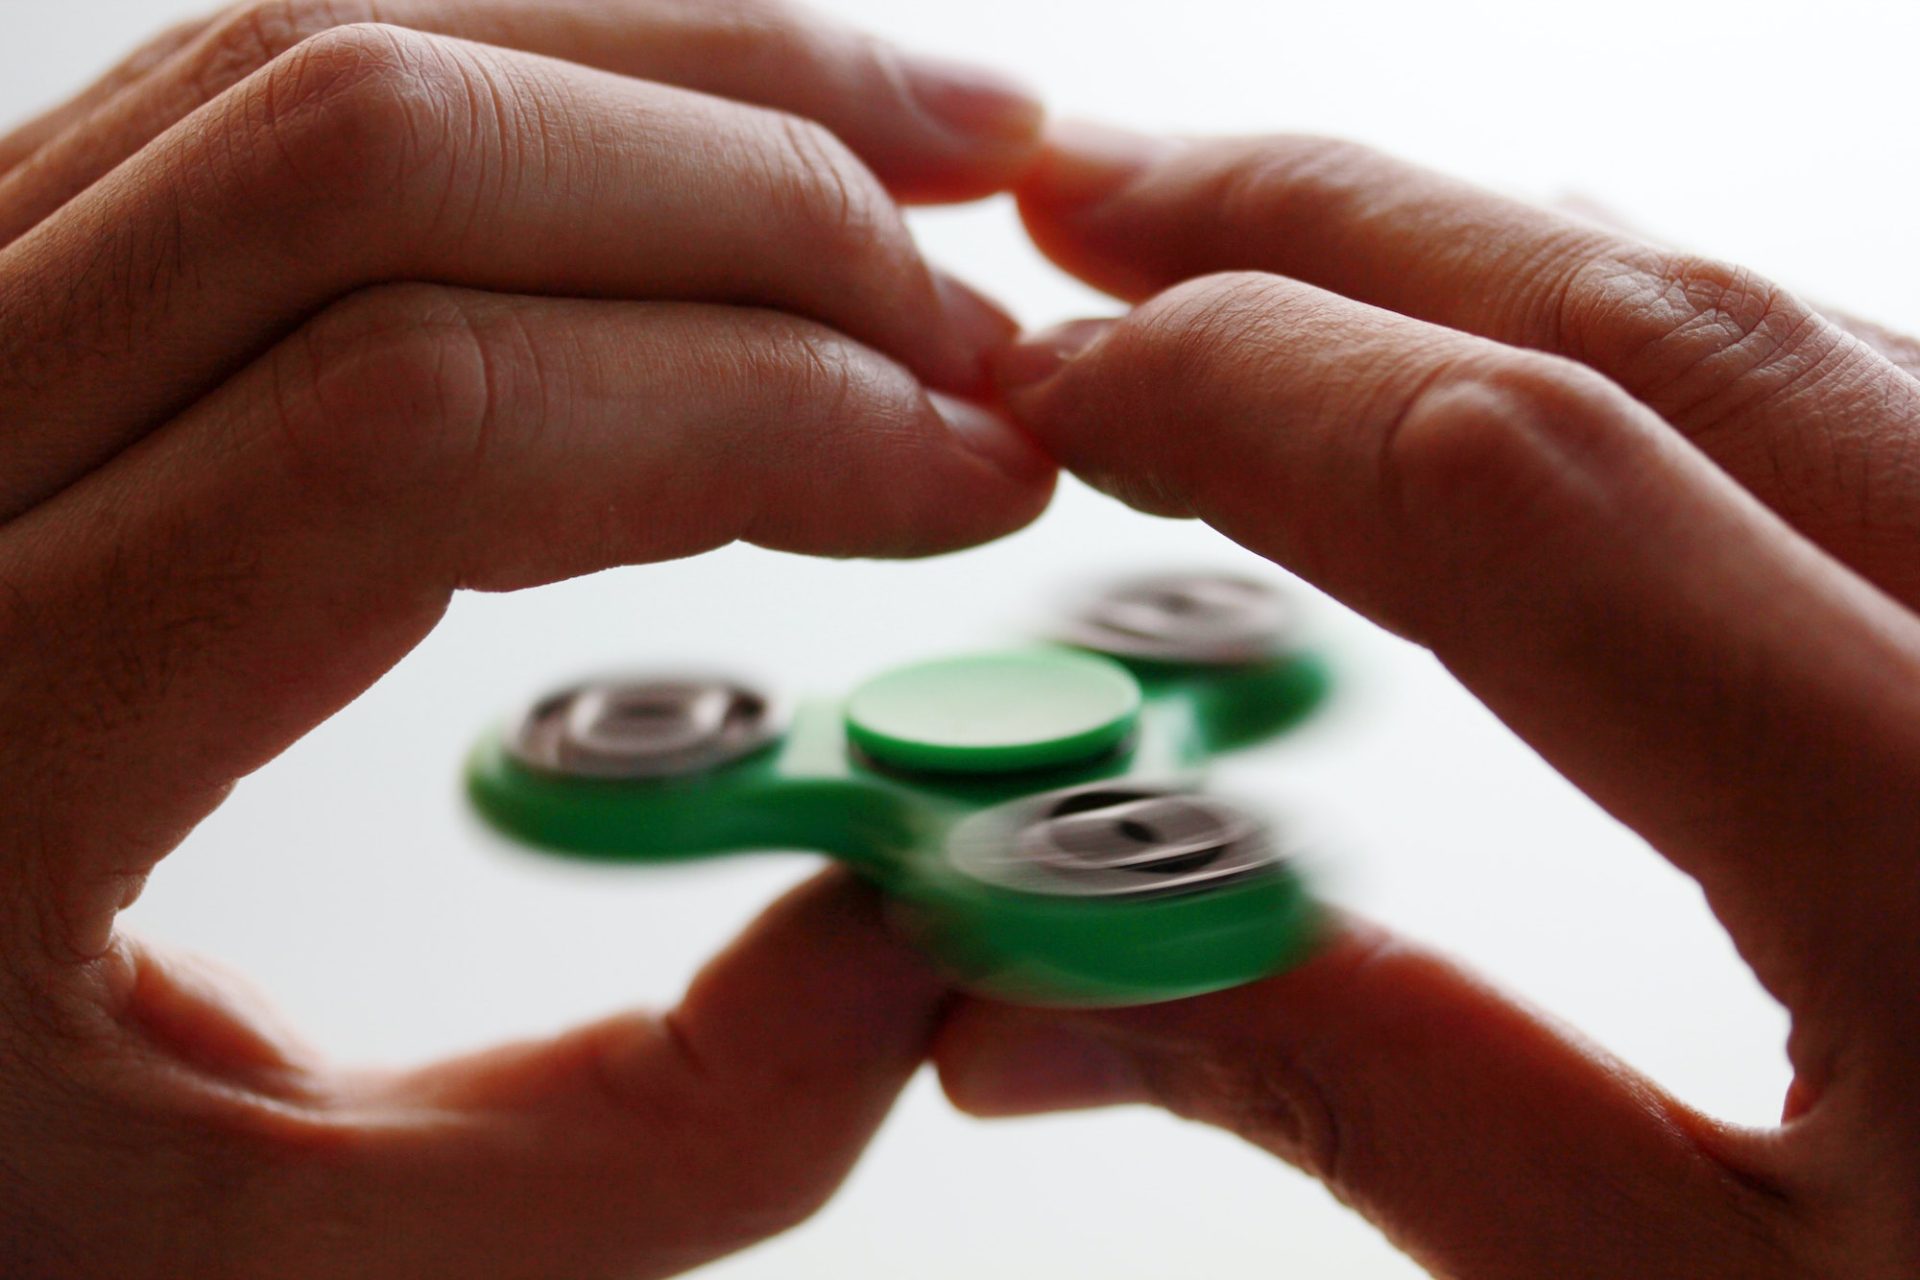 Fidget spin used by hyperactive people to calm down